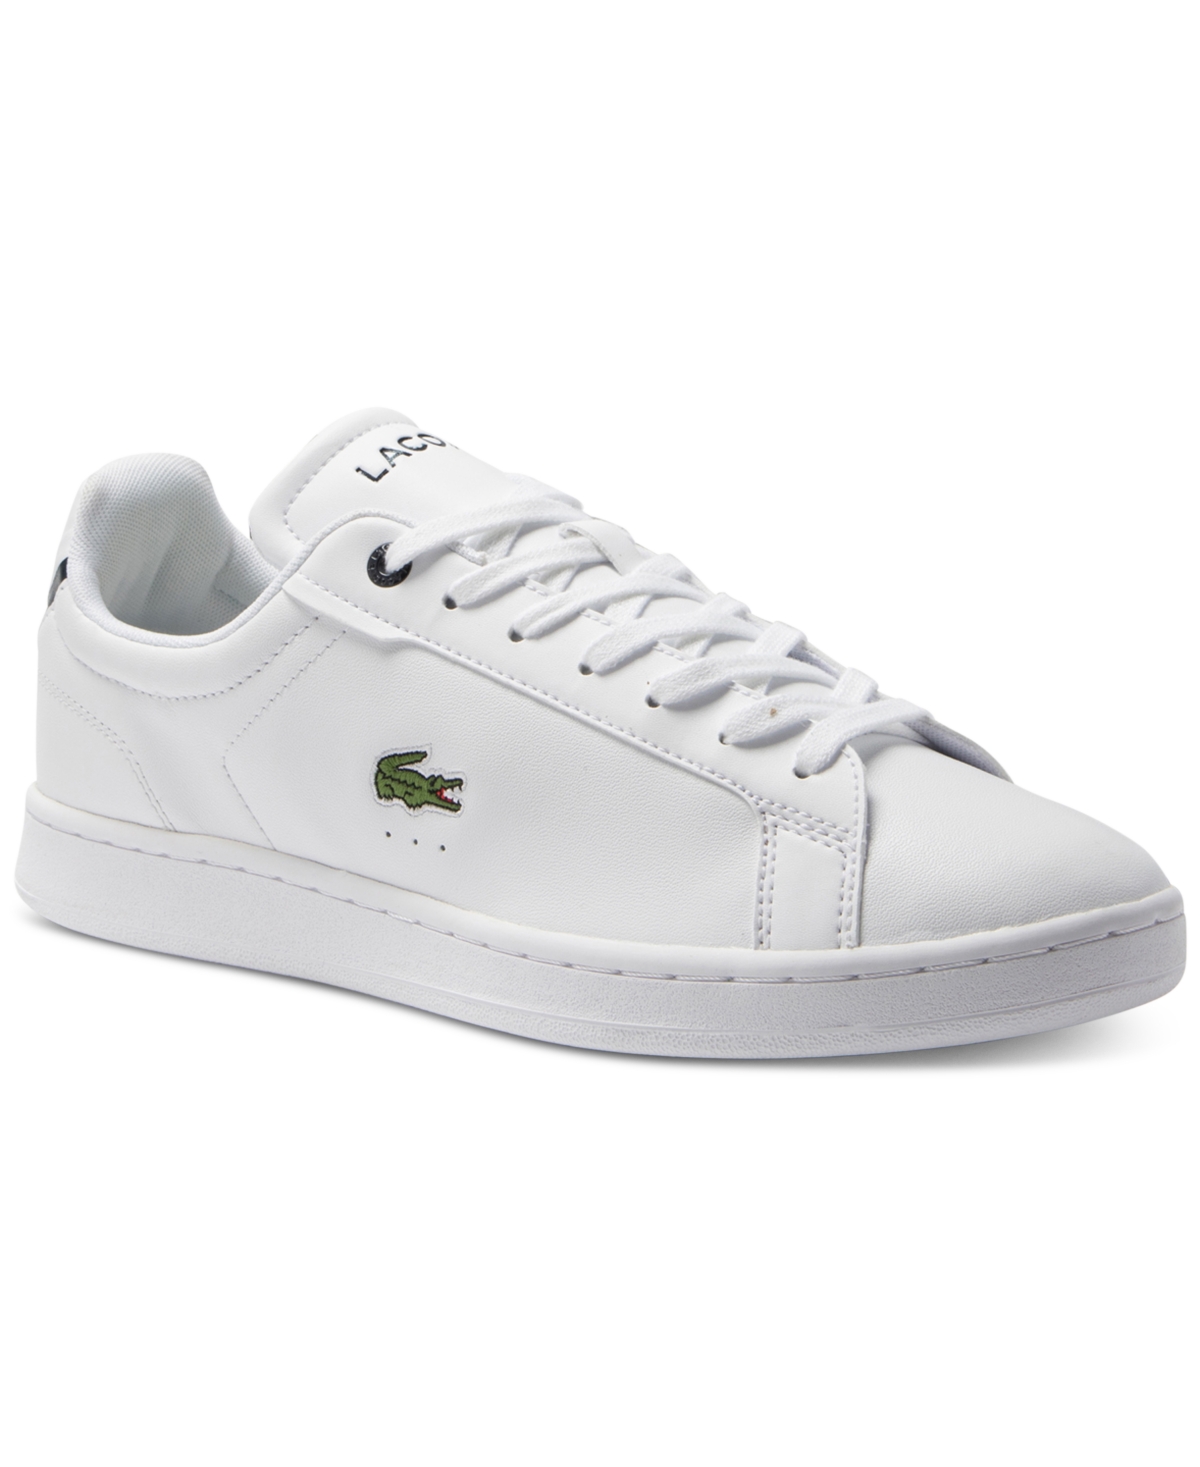 Lacoste Carnaby Pro Bl23 Mens Leather Casual Casual And Fashion Sneakers In White